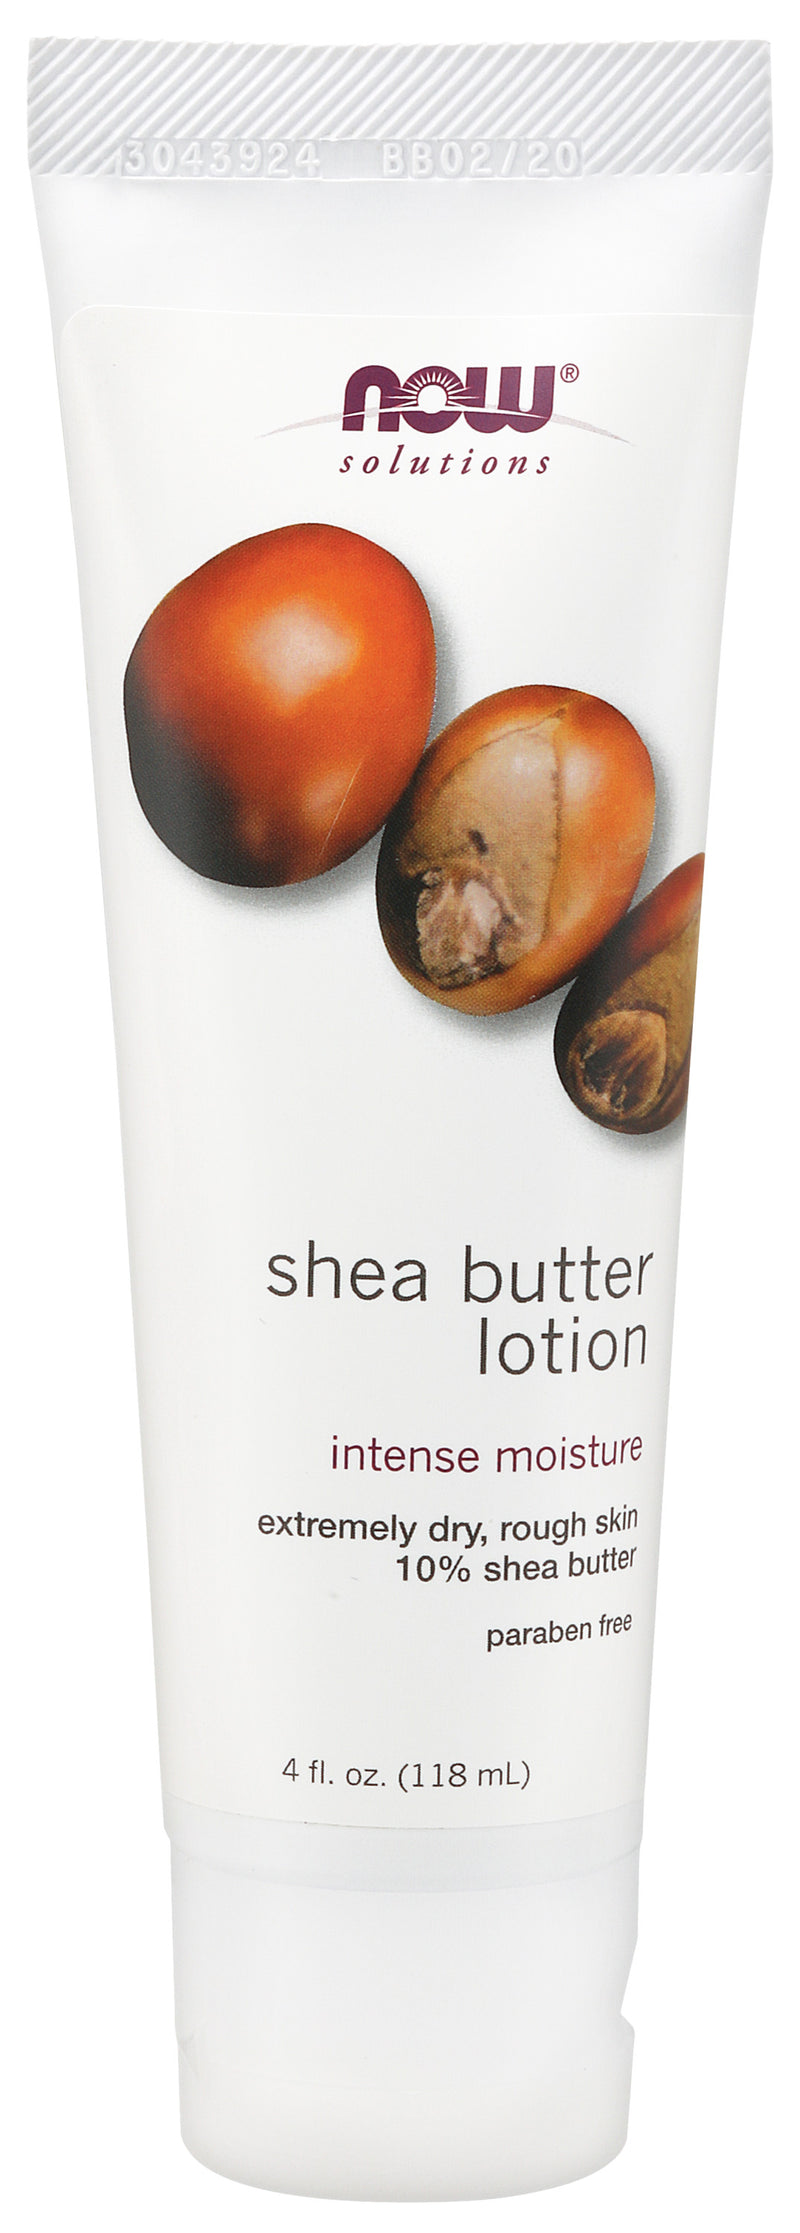 Now Solutions - Shea Butter Lotion 4 fl oz (118 ml)